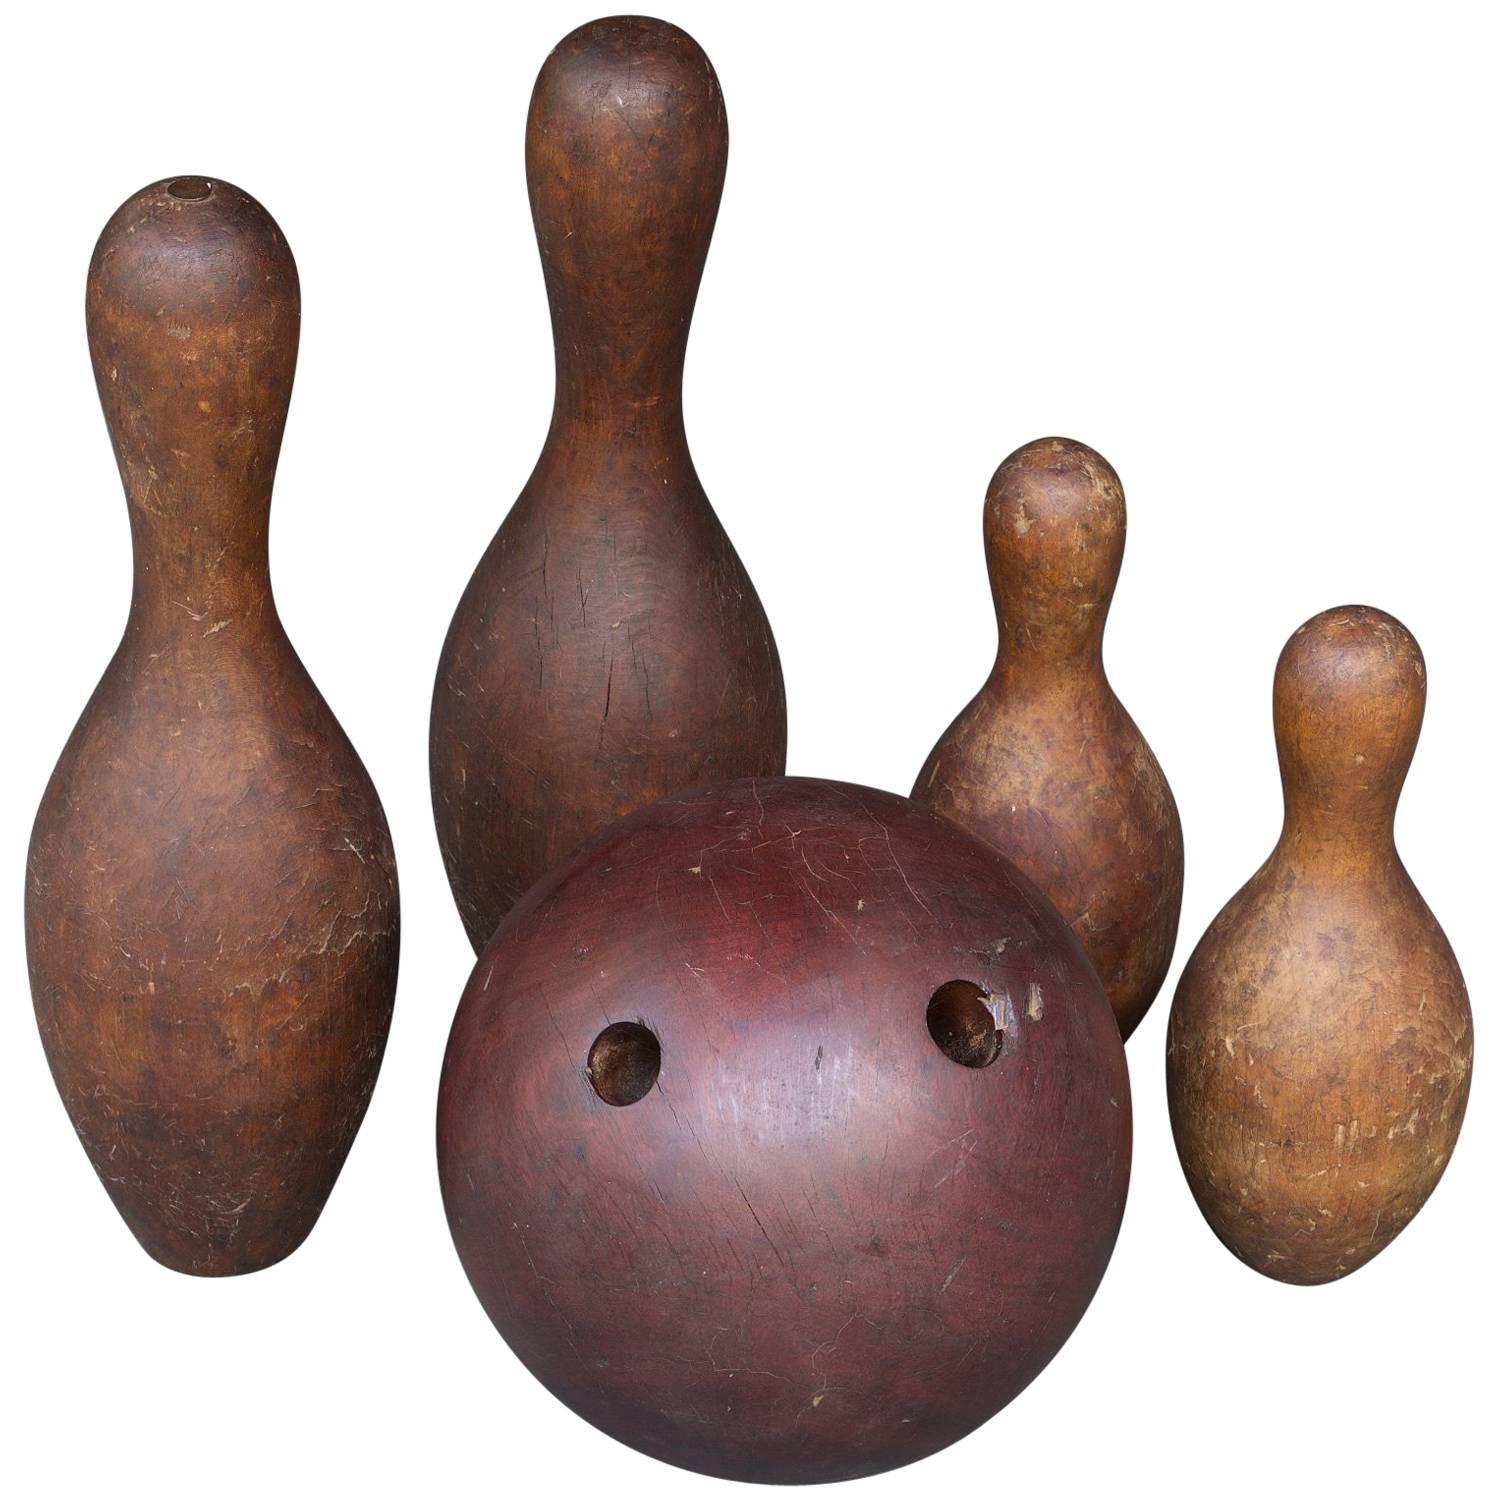 Antique Hand-Turned Lignum Vitae Ironwood Bowling Ball Four Pins Hand Made Craft